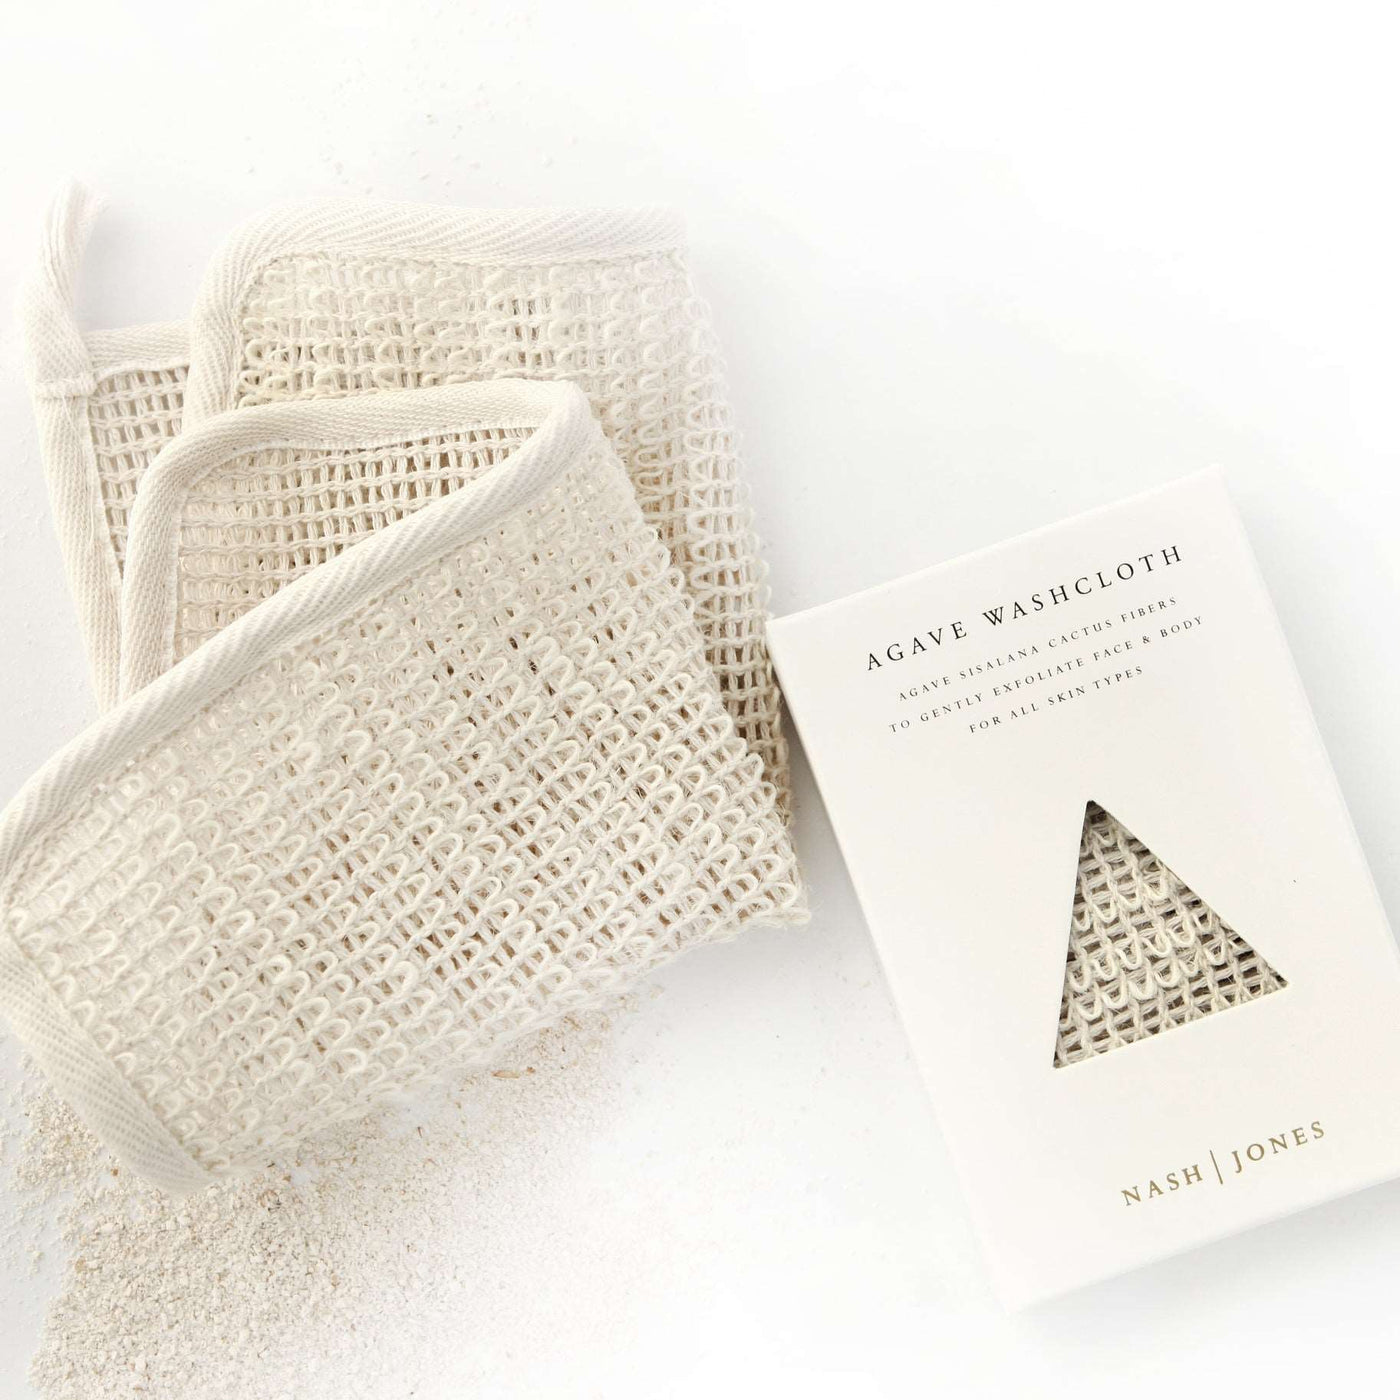 Agave Washcloth By NASH AND JONES